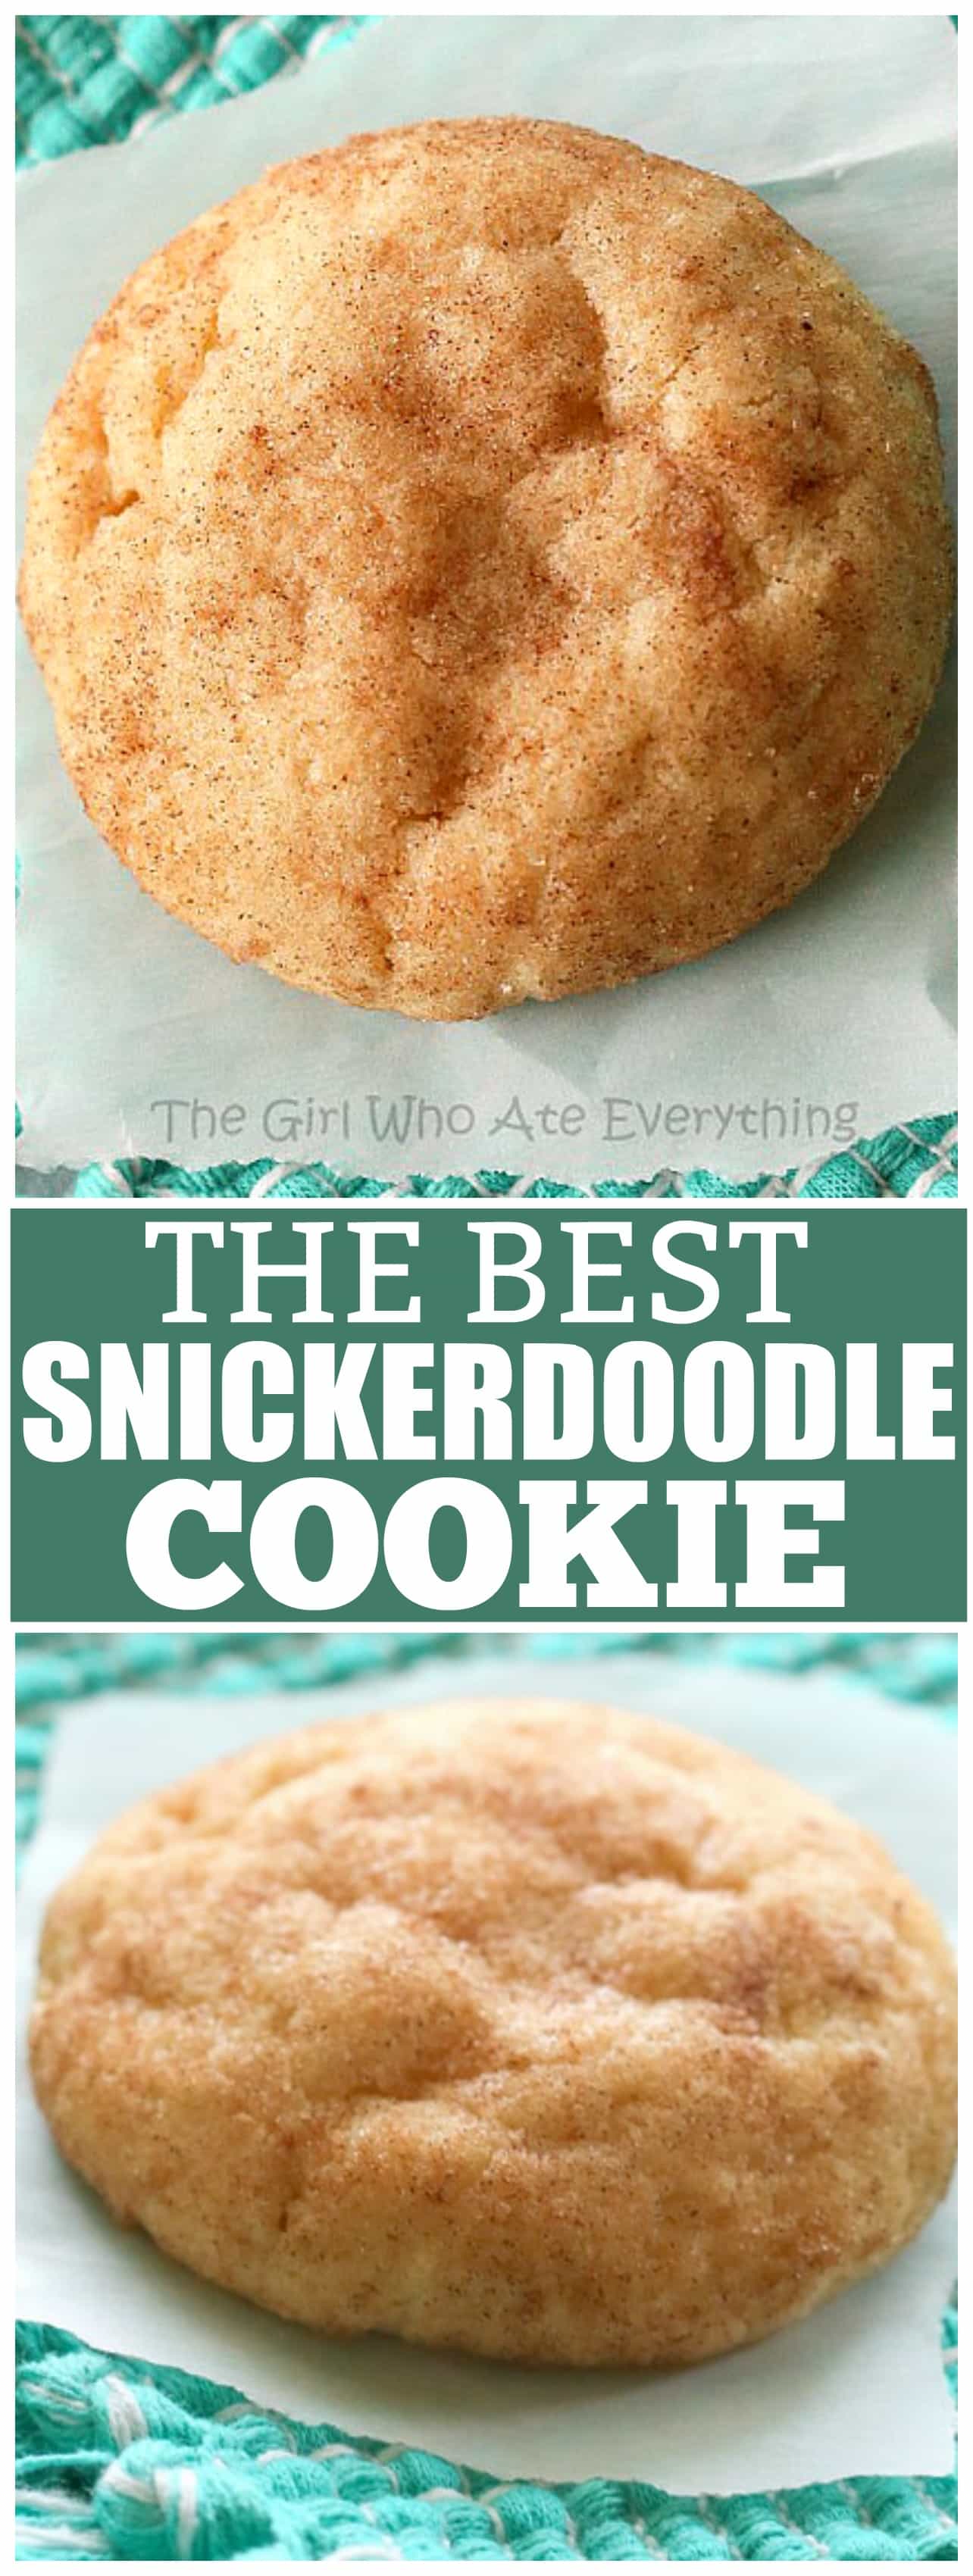 This is the Best Snickerdoodle recipe using all butter (no shortening here) and yields a very thick and soft cookie. #best #snickerdoodle #cookies #recipe #dessert